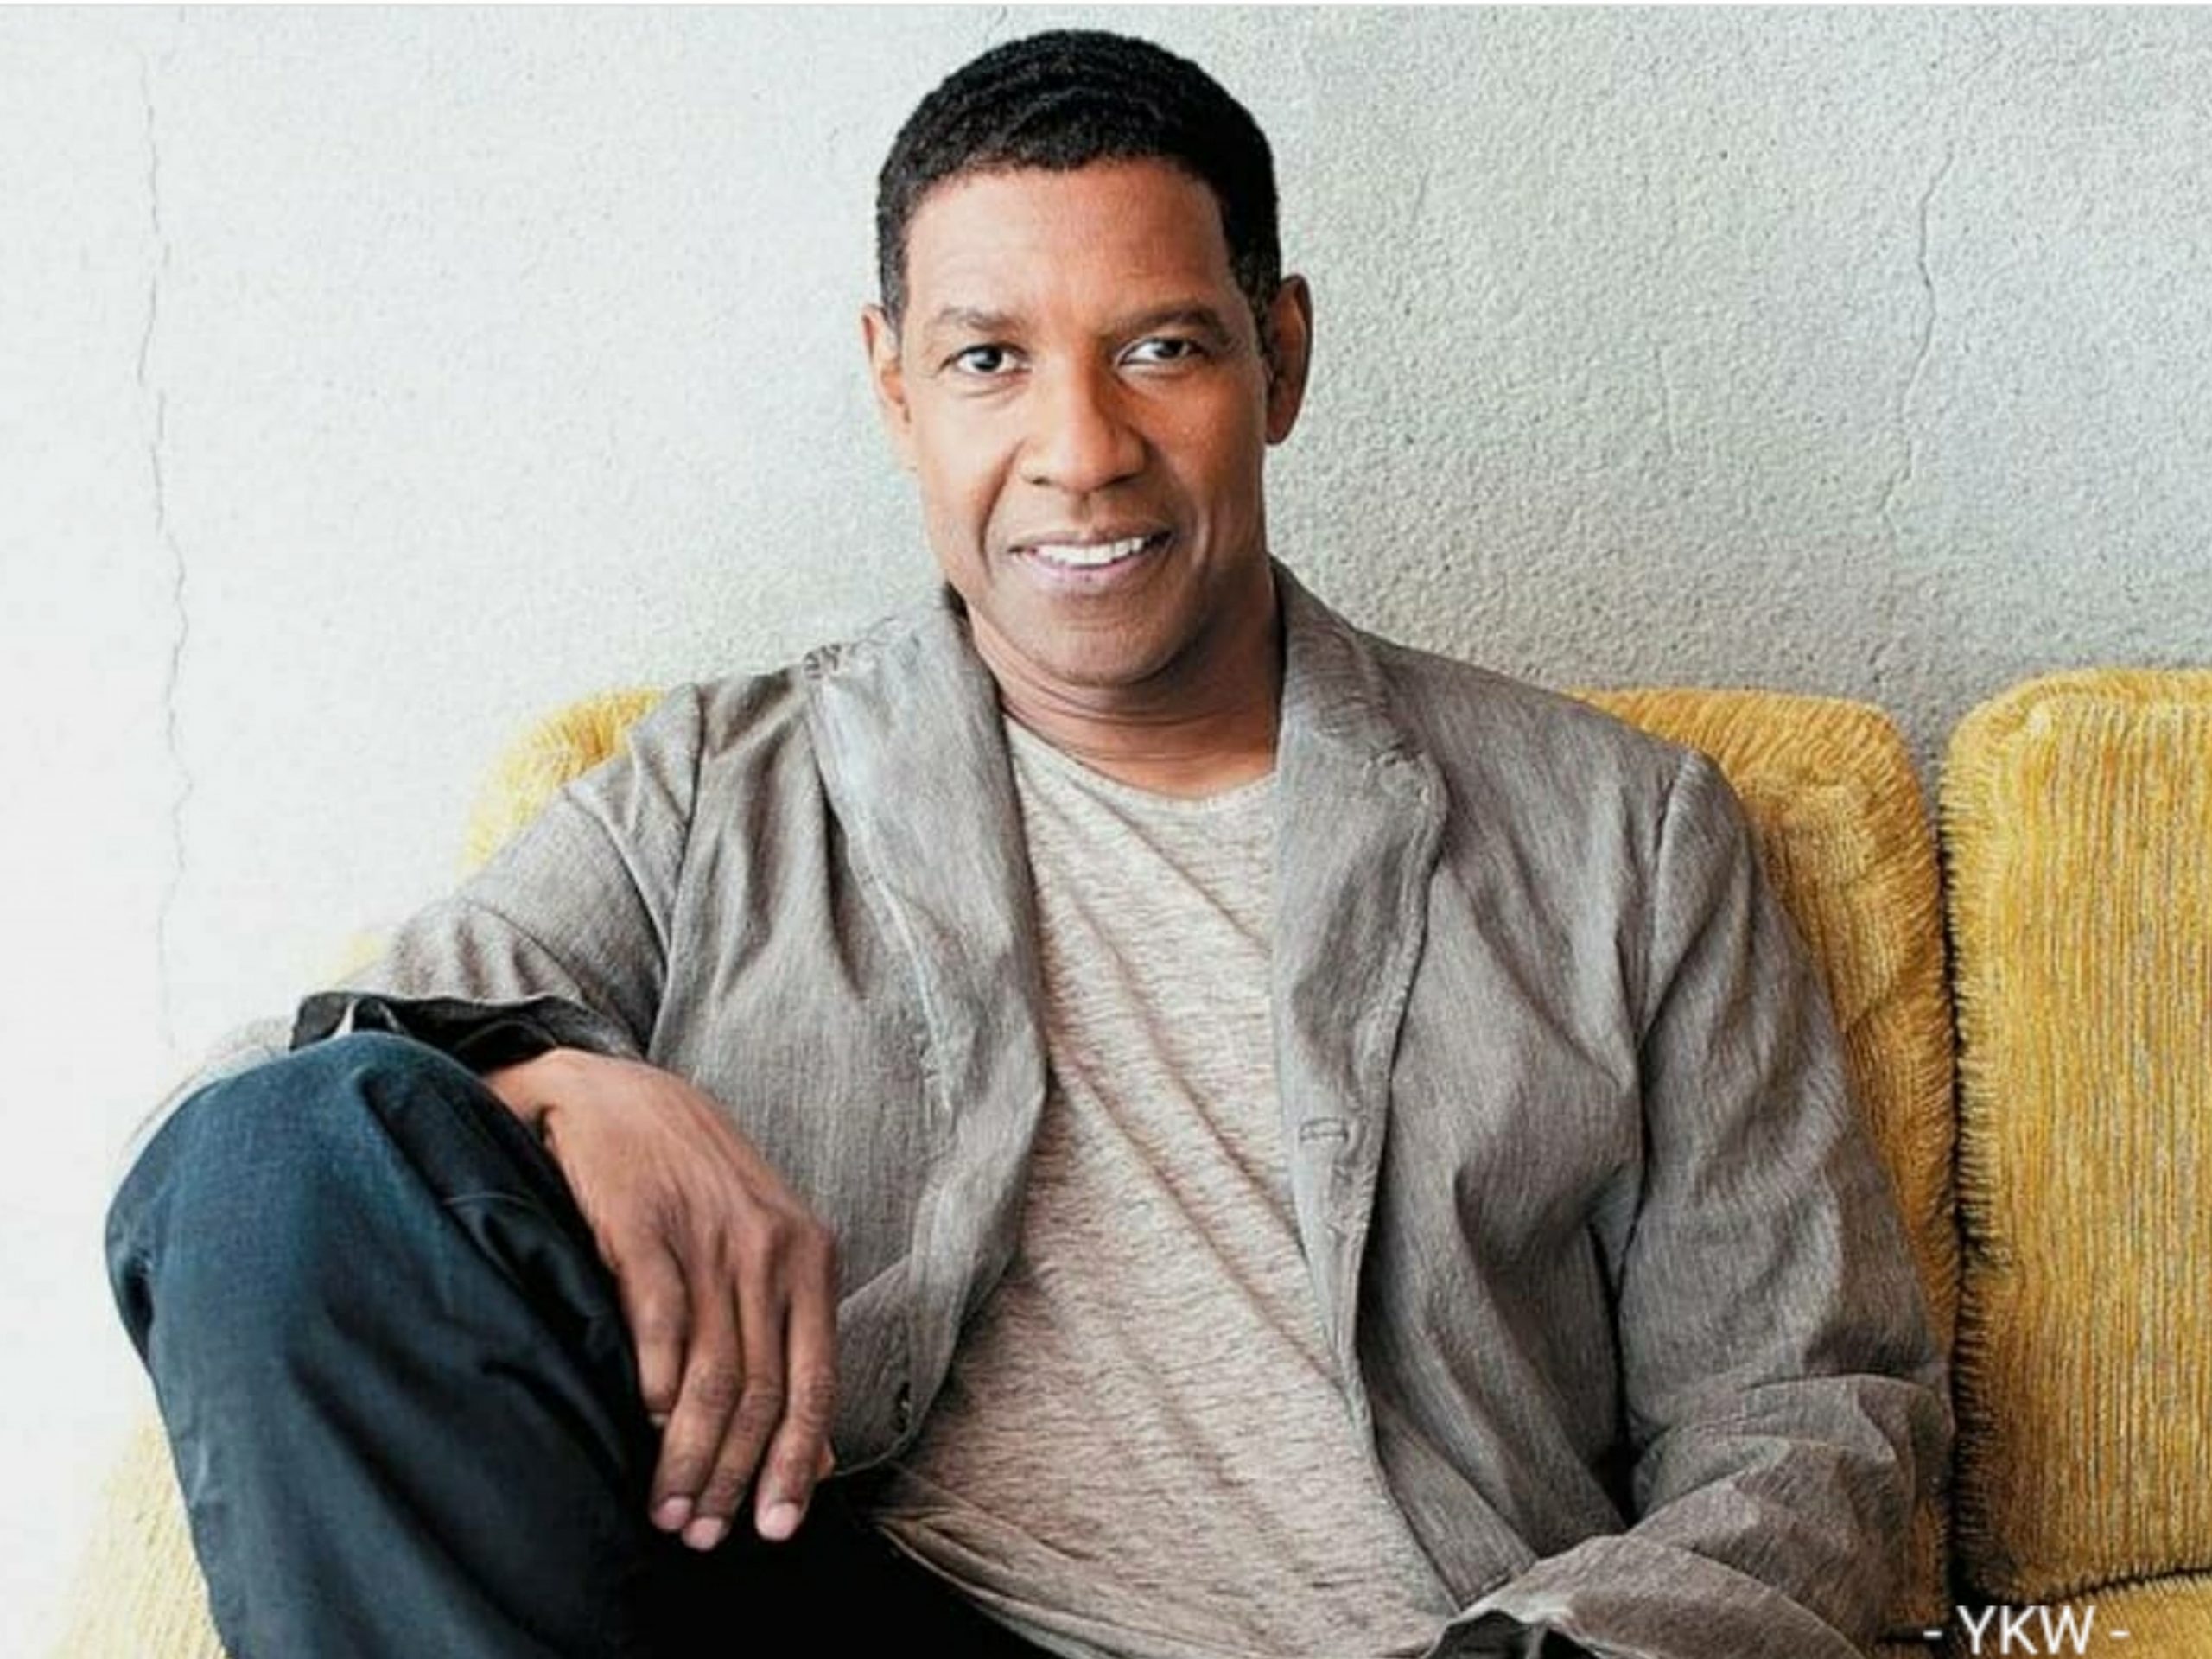 Denzel Washington And Family ‘Safe” After Firefighters Respond To Smoke At L.A. Home